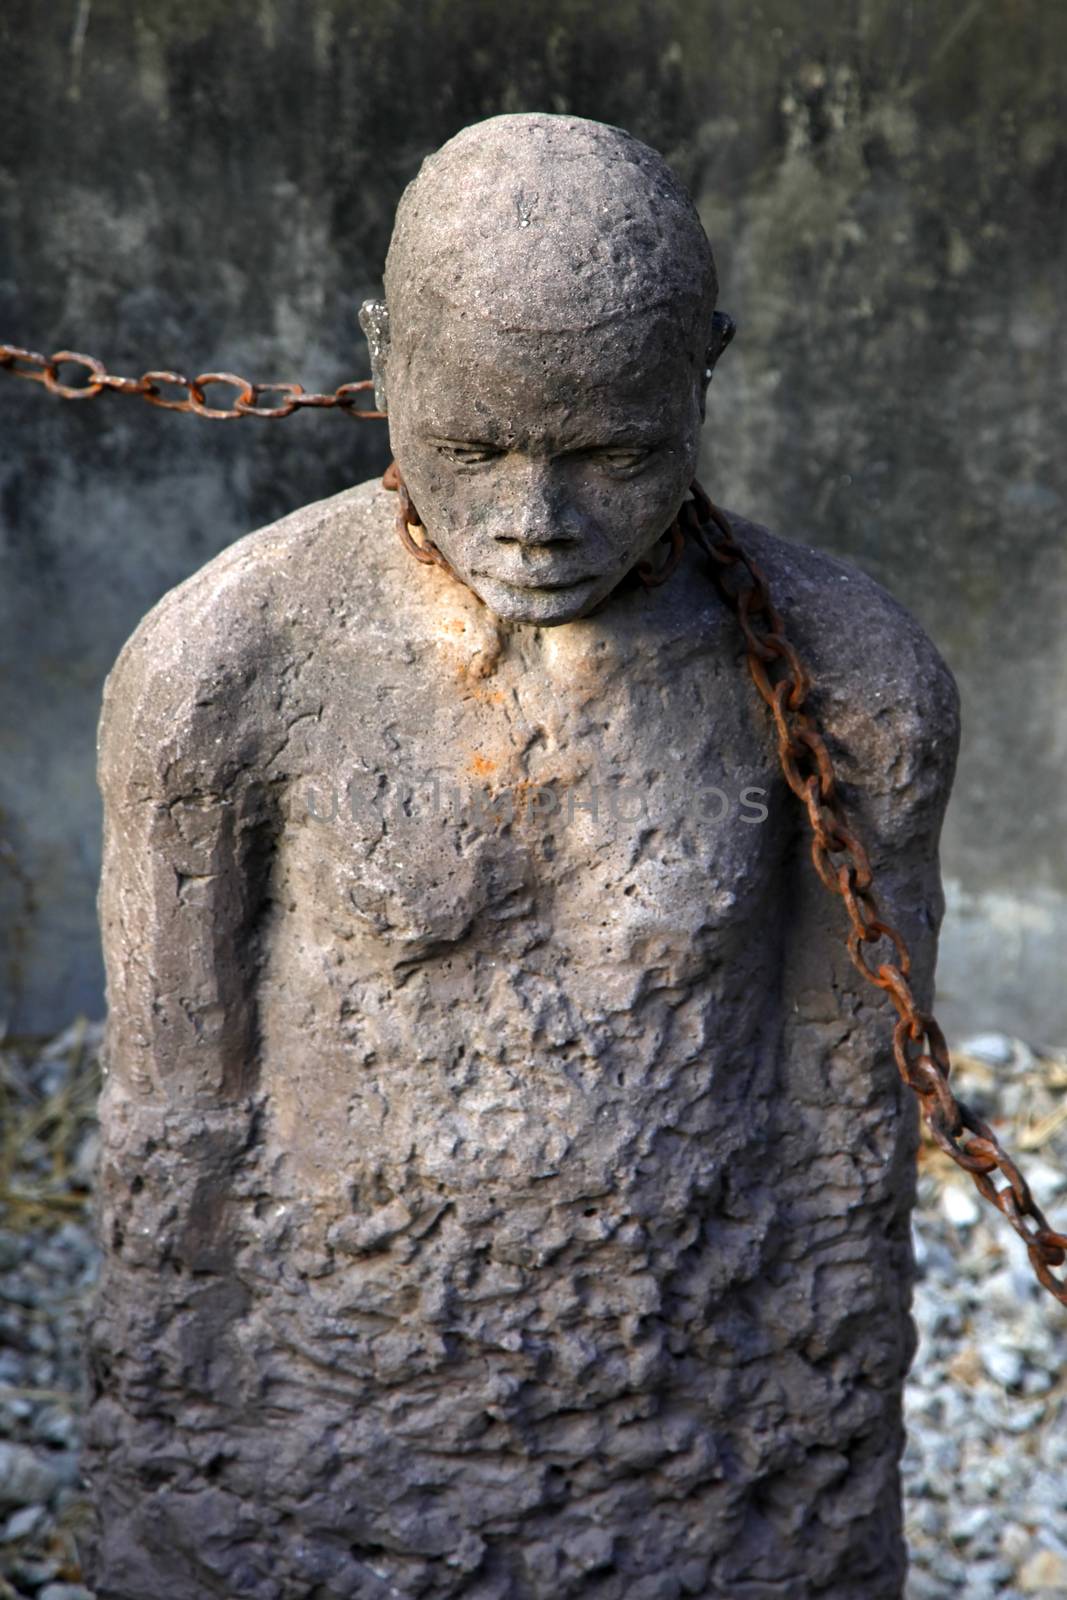 A statue in Stone Town, Zanzibar dipicting and mourning the African slave trade